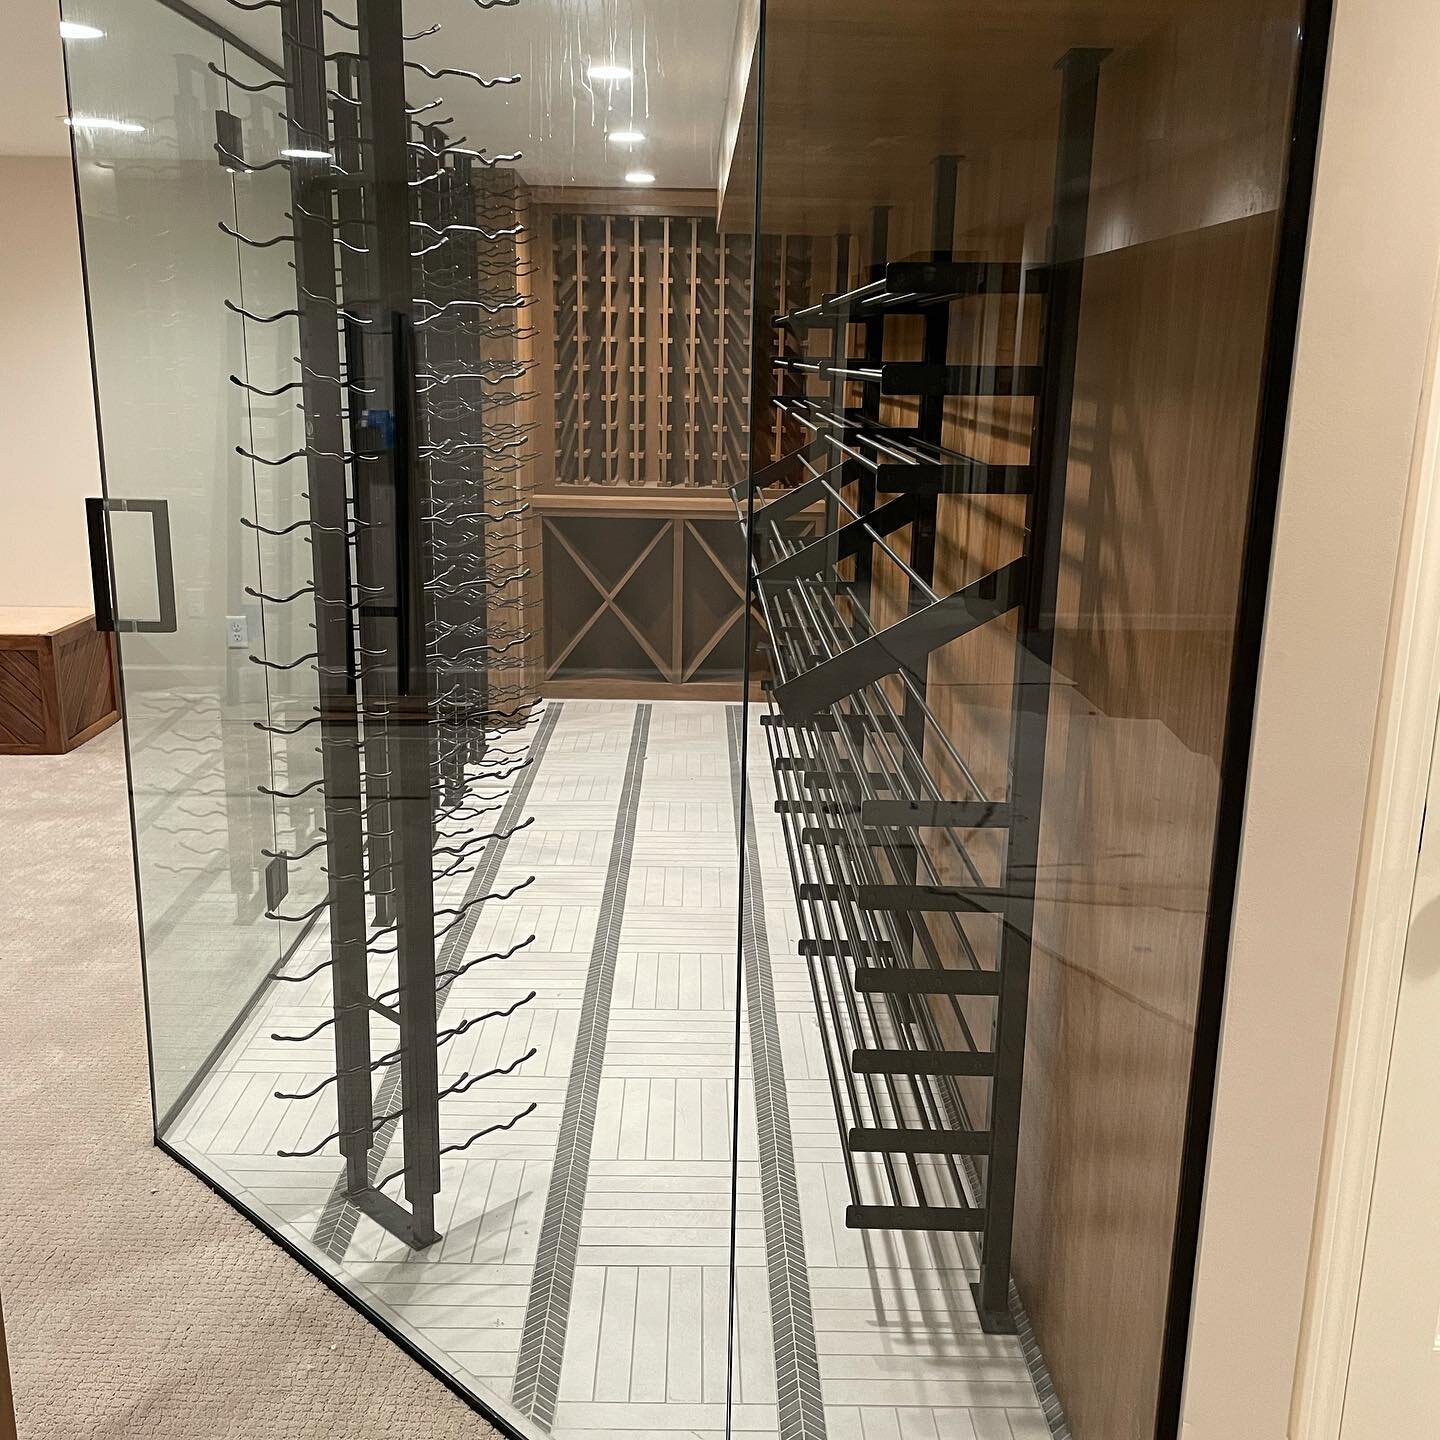 Loving the way this wine room is coming together at our project in Leawood!  @vintageview_usa wine racks making our job easy!
&bull;
&bull;
@vintageview_usa
@marciknoffinteriors
@parkscabinets
@westportglass
&bull;
&bull;
#wine #wineroom #basementrem